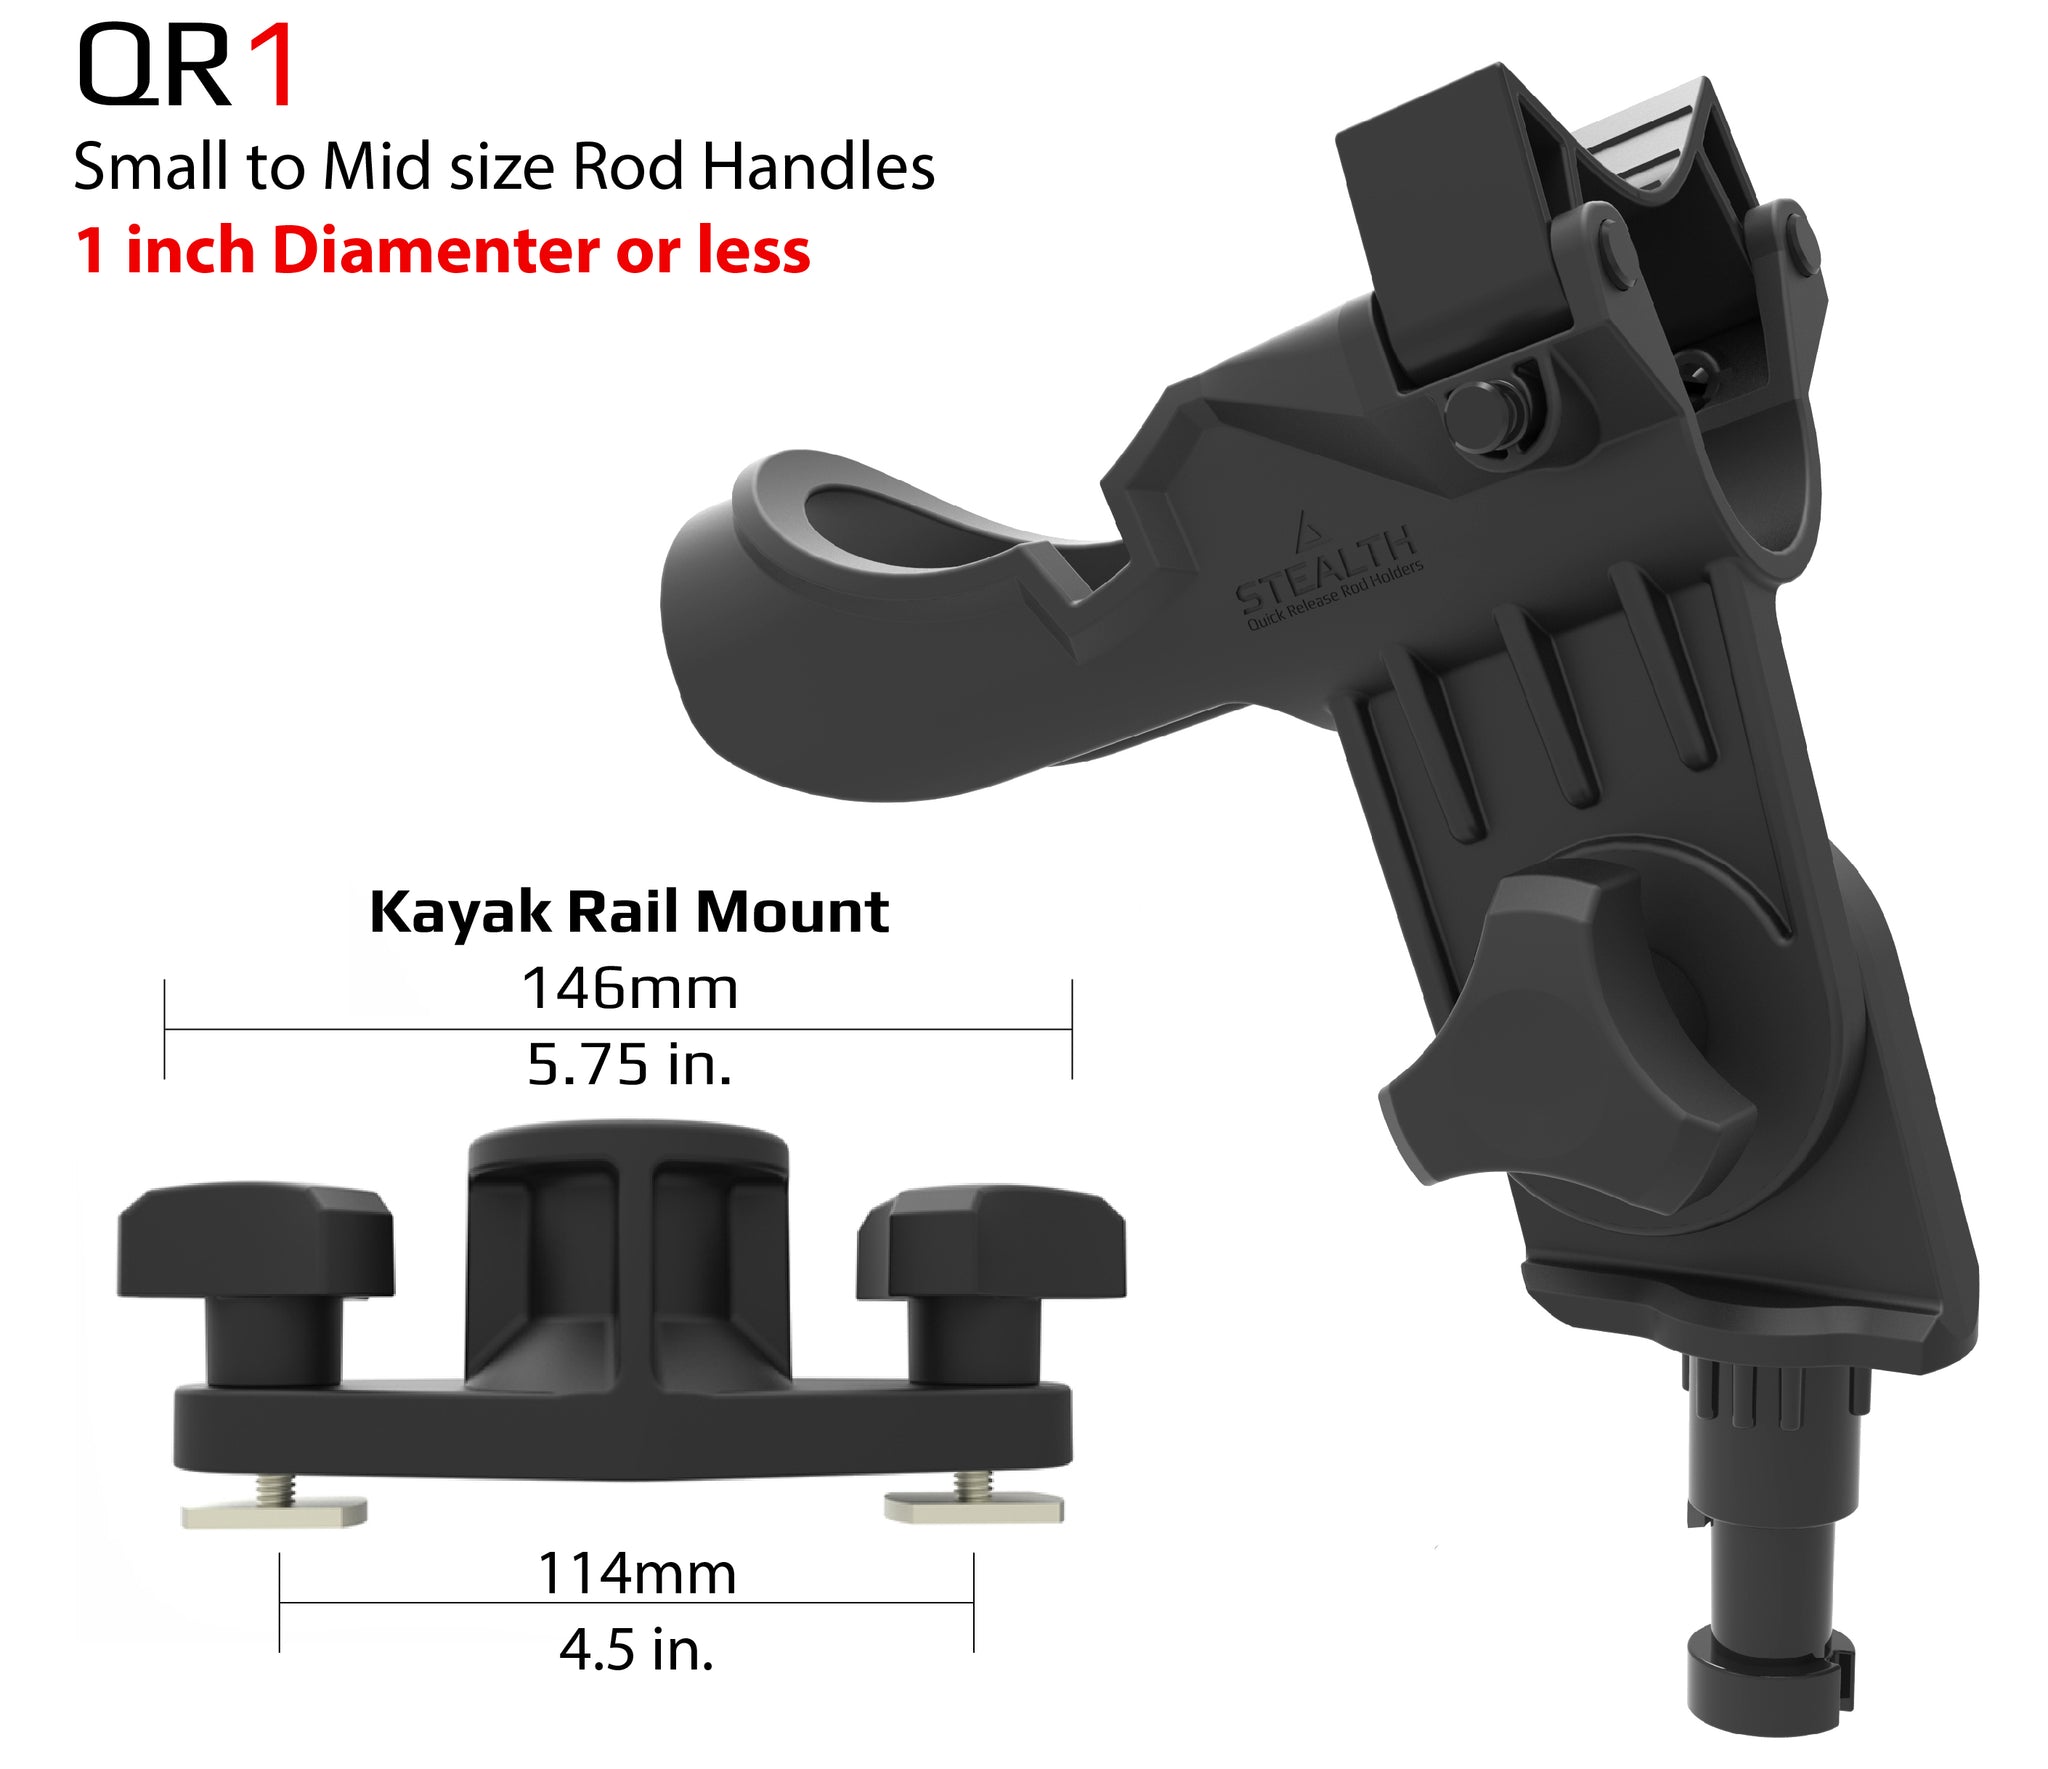 QR-1 with Kayak Rail Mount - Stealth Rod Holders